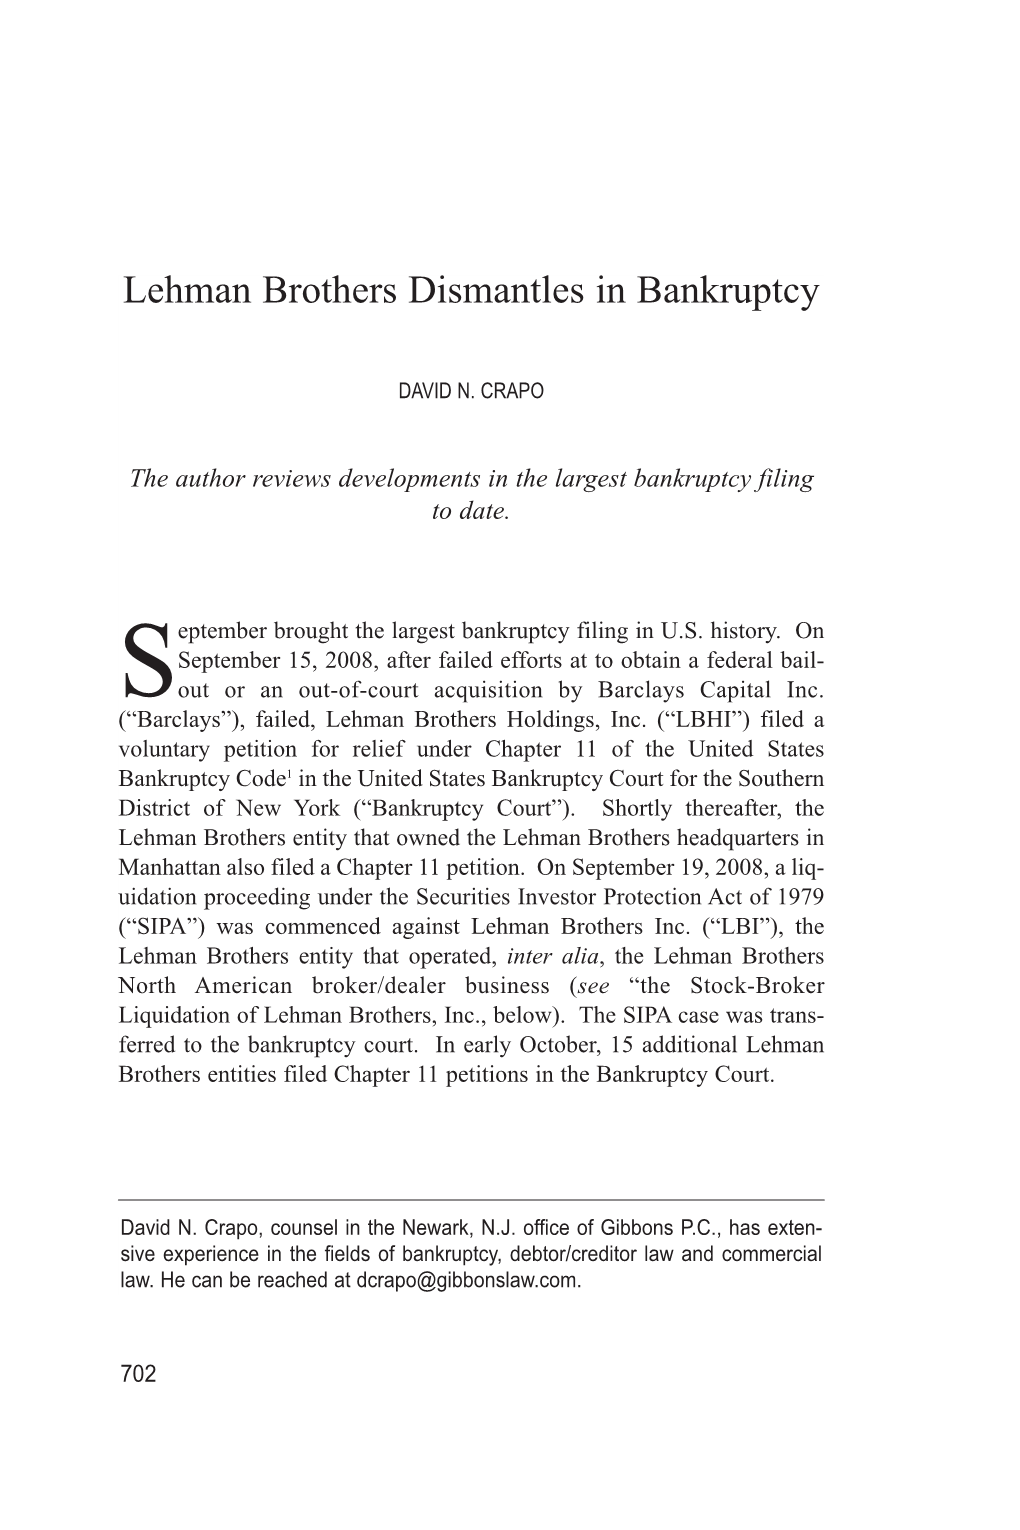 Lehman Brothers Dismantles in Bankruptcy